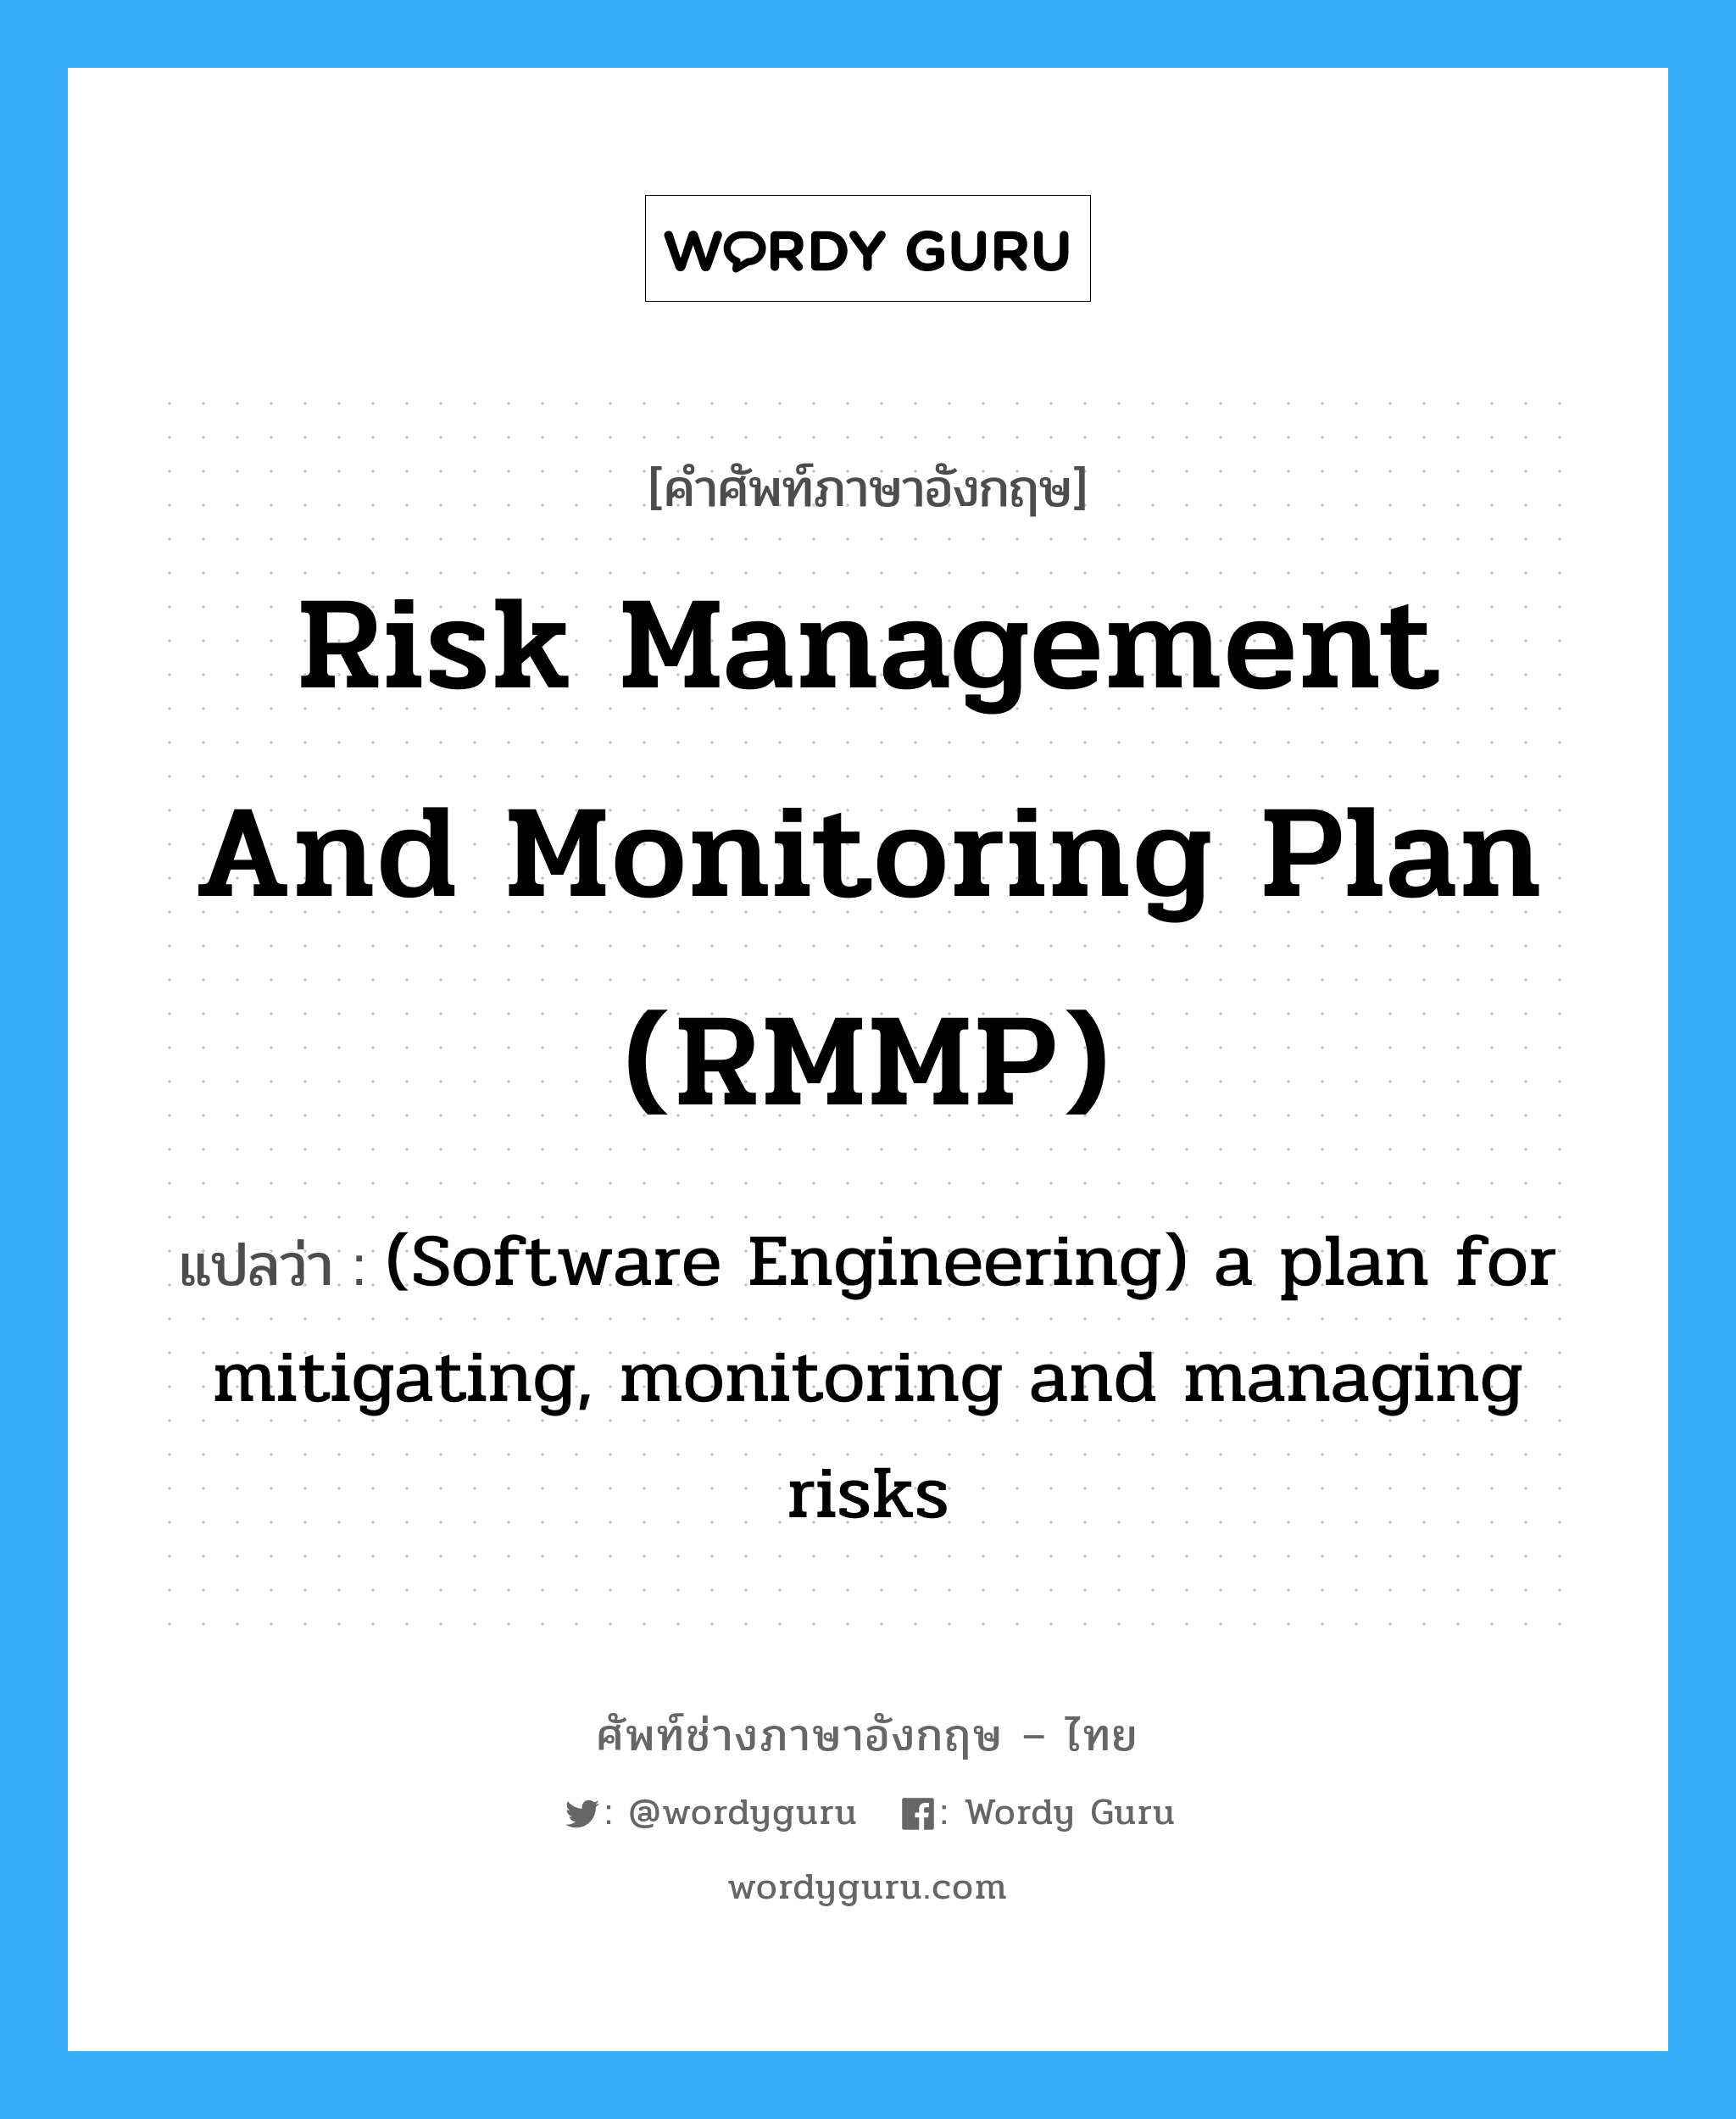 (Software Engineering) a plan for mitigating, monitoring and managing risks ภาษาอังกฤษ?, คำศัพท์ช่างภาษาอังกฤษ - ไทย (Software Engineering) a plan for mitigating, monitoring and managing risks คำศัพท์ภาษาอังกฤษ (Software Engineering) a plan for mitigating, monitoring and managing risks แปลว่า Risk Management and Monitoring Plan (RMMP)